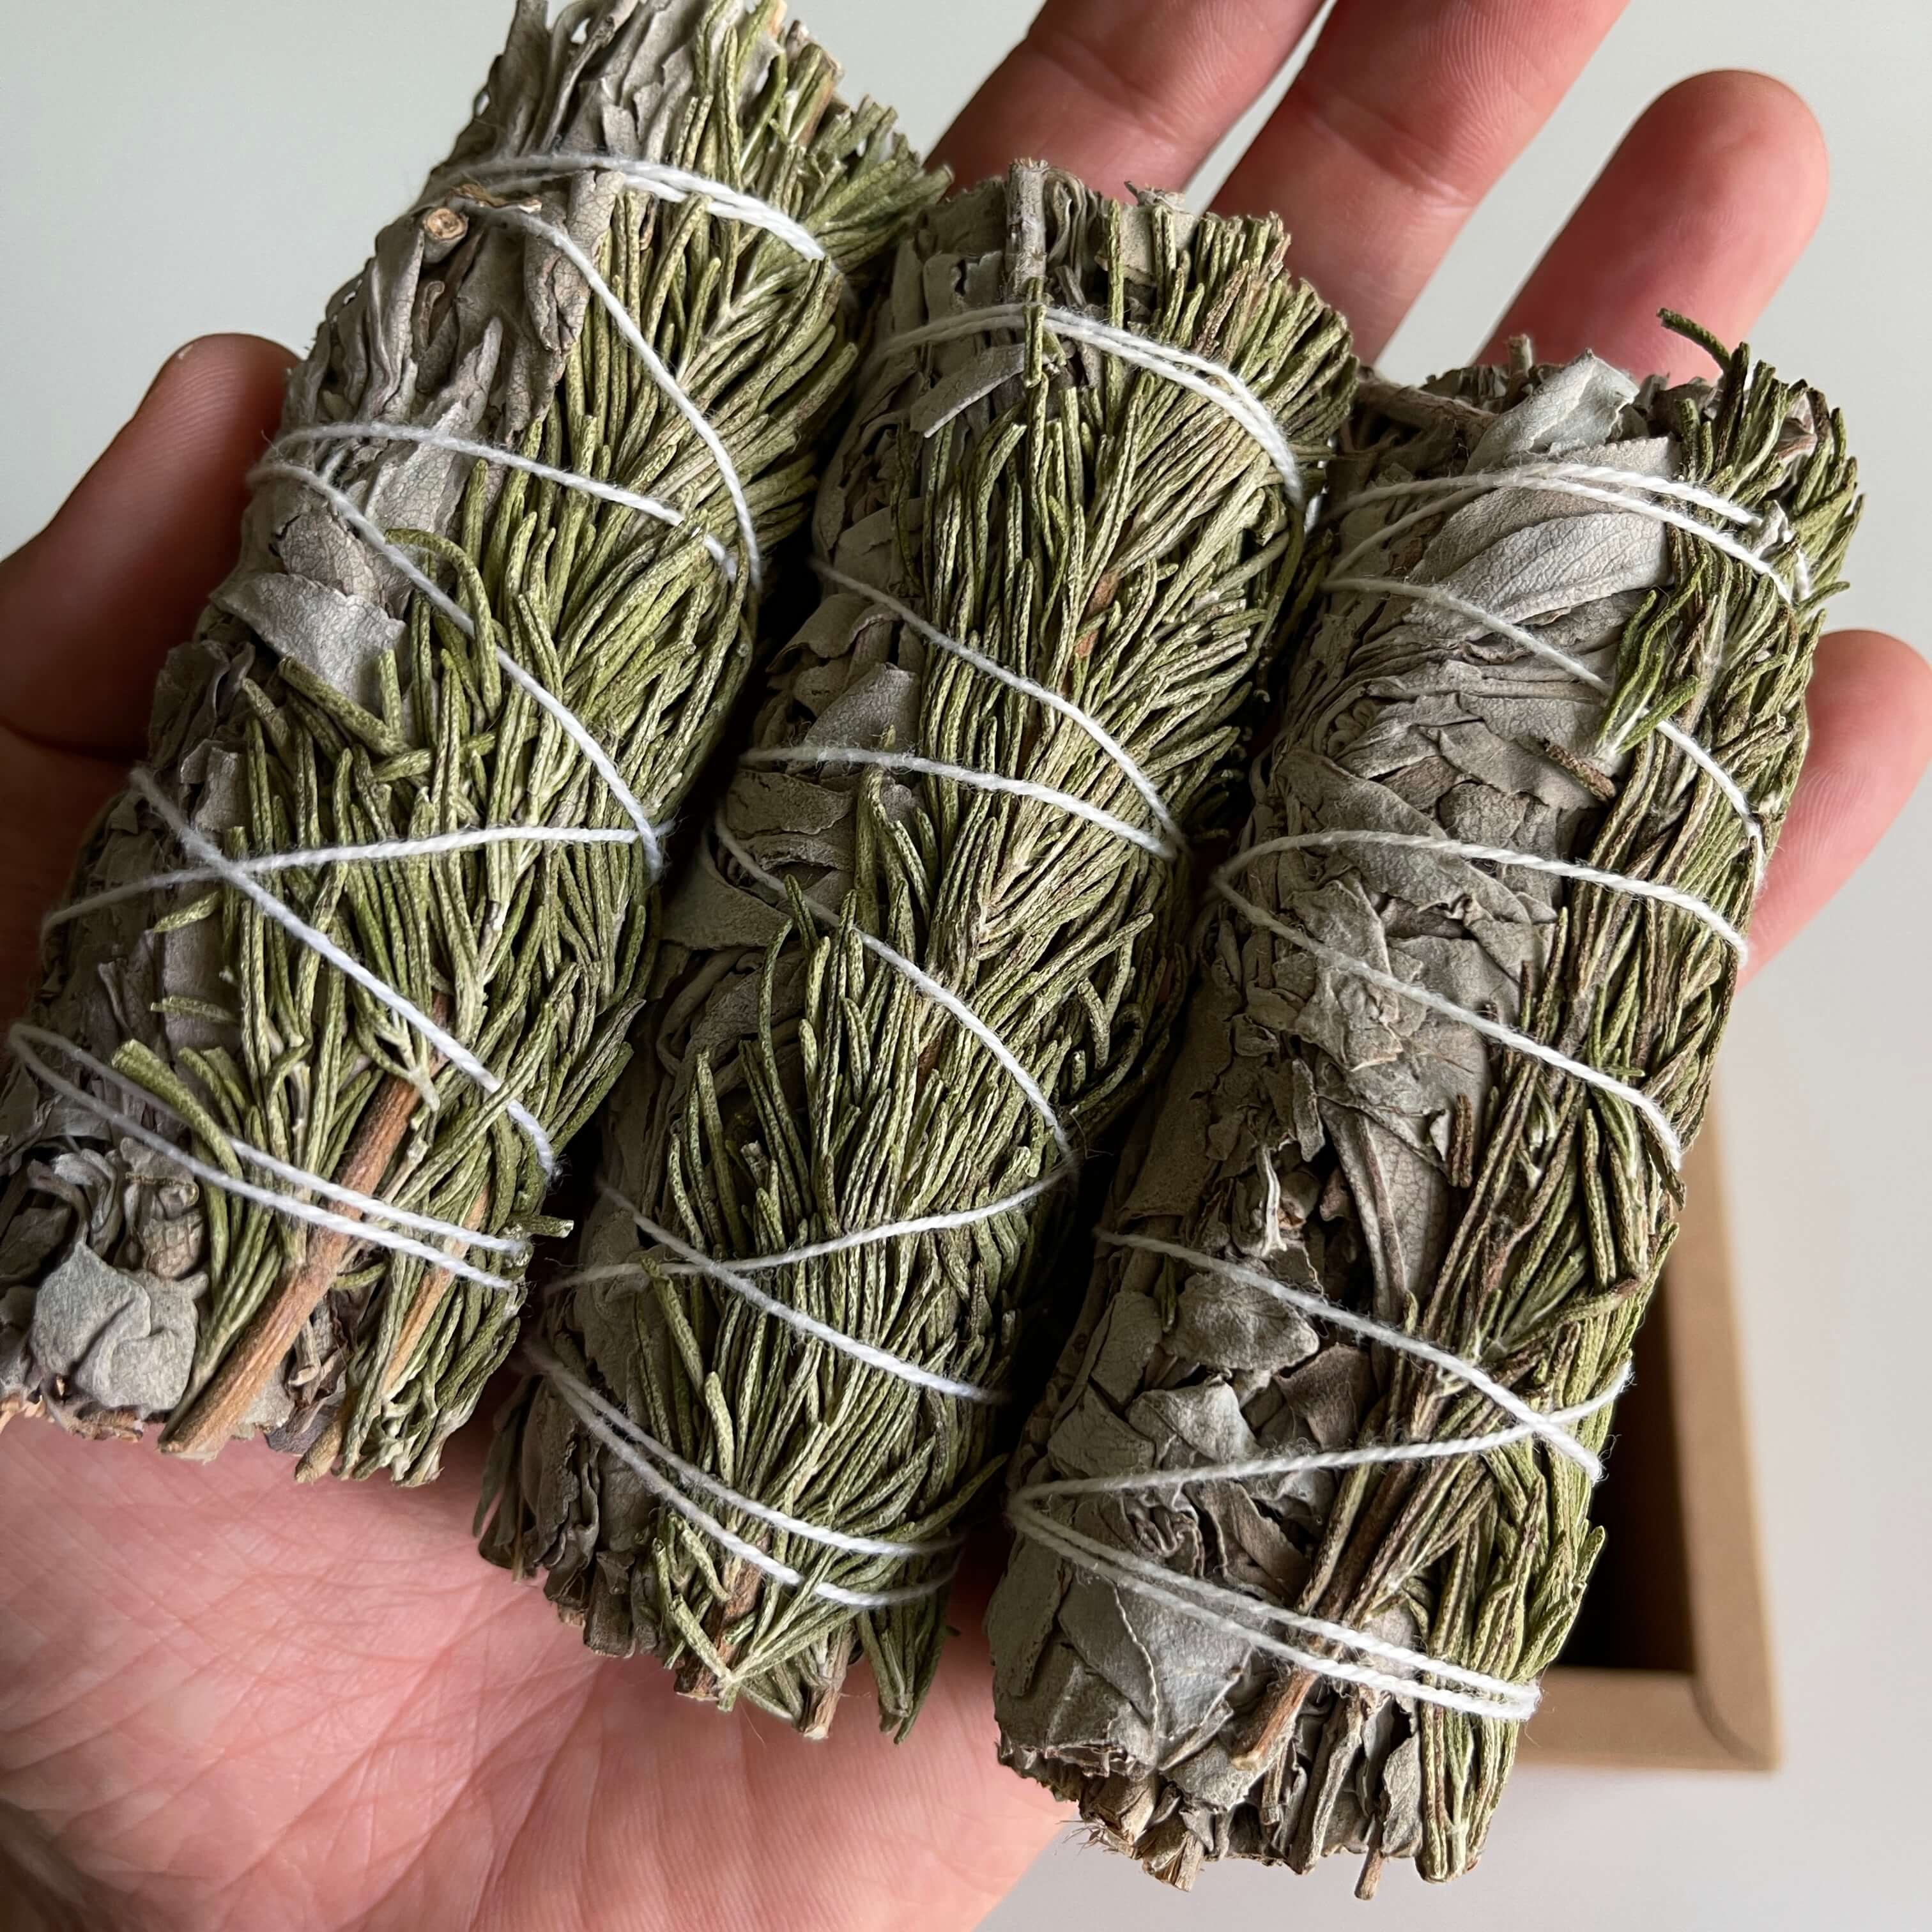 3 Smudge sticks of White Sage with Rosemary 4 Inch in Hands 